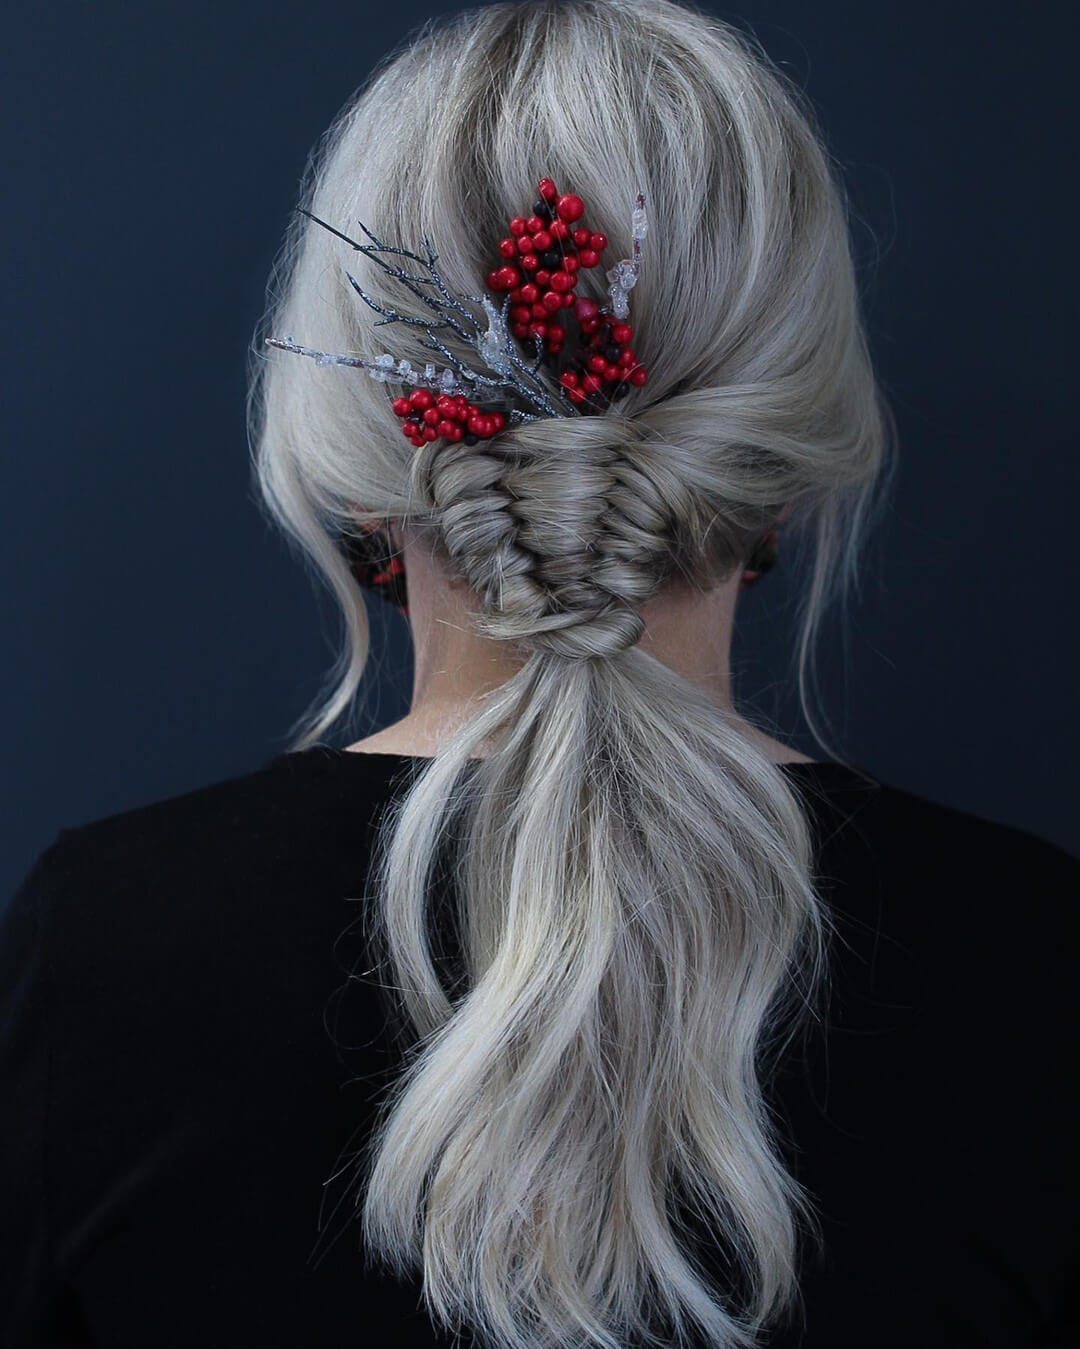 Beautify Cherry Hairstyle For Frosty Hairs - Platinum Hairs